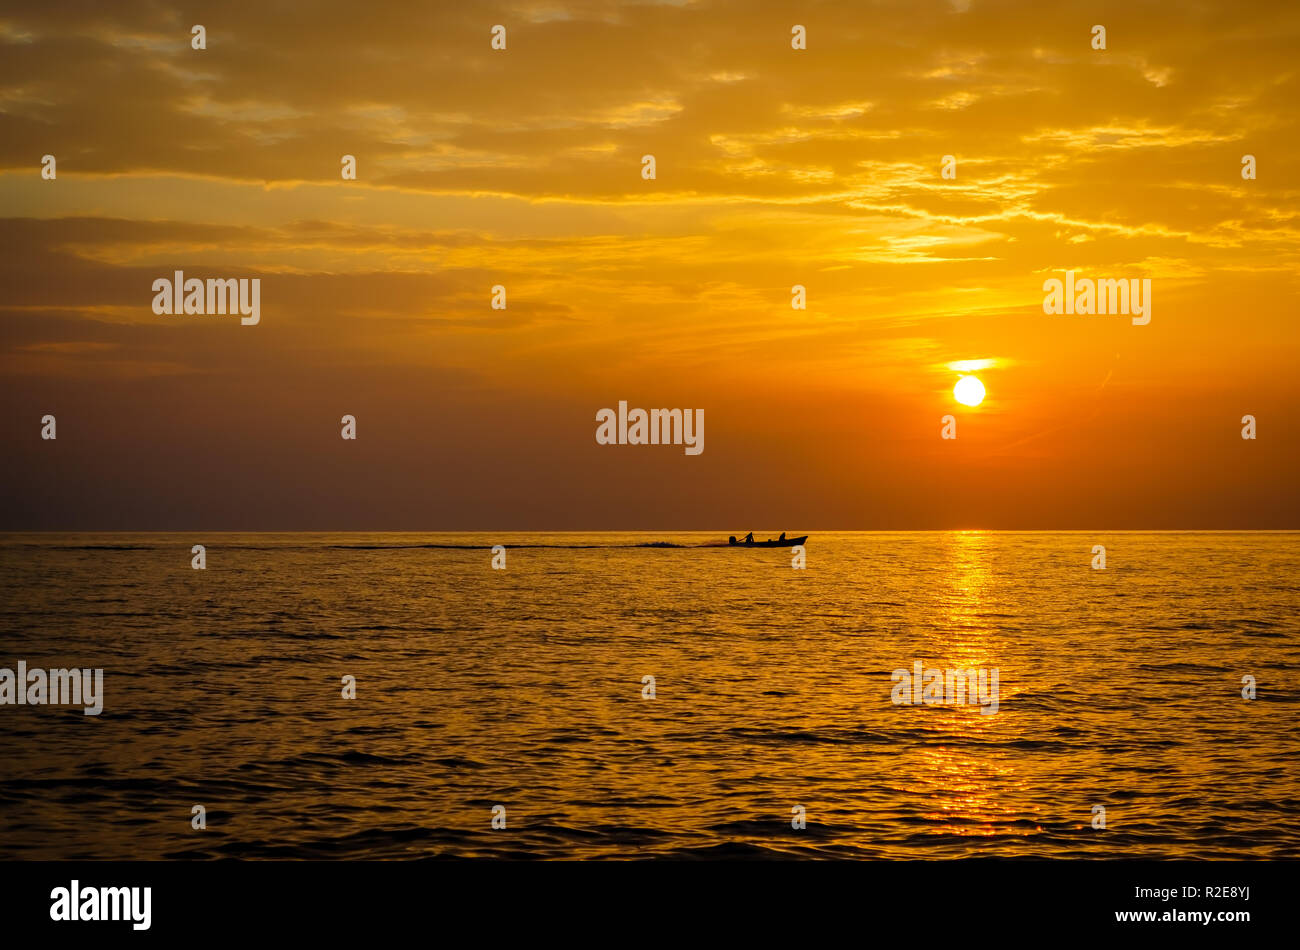 Silhouette of fishermen in a boat starting their day during sunrise. Stock Photo